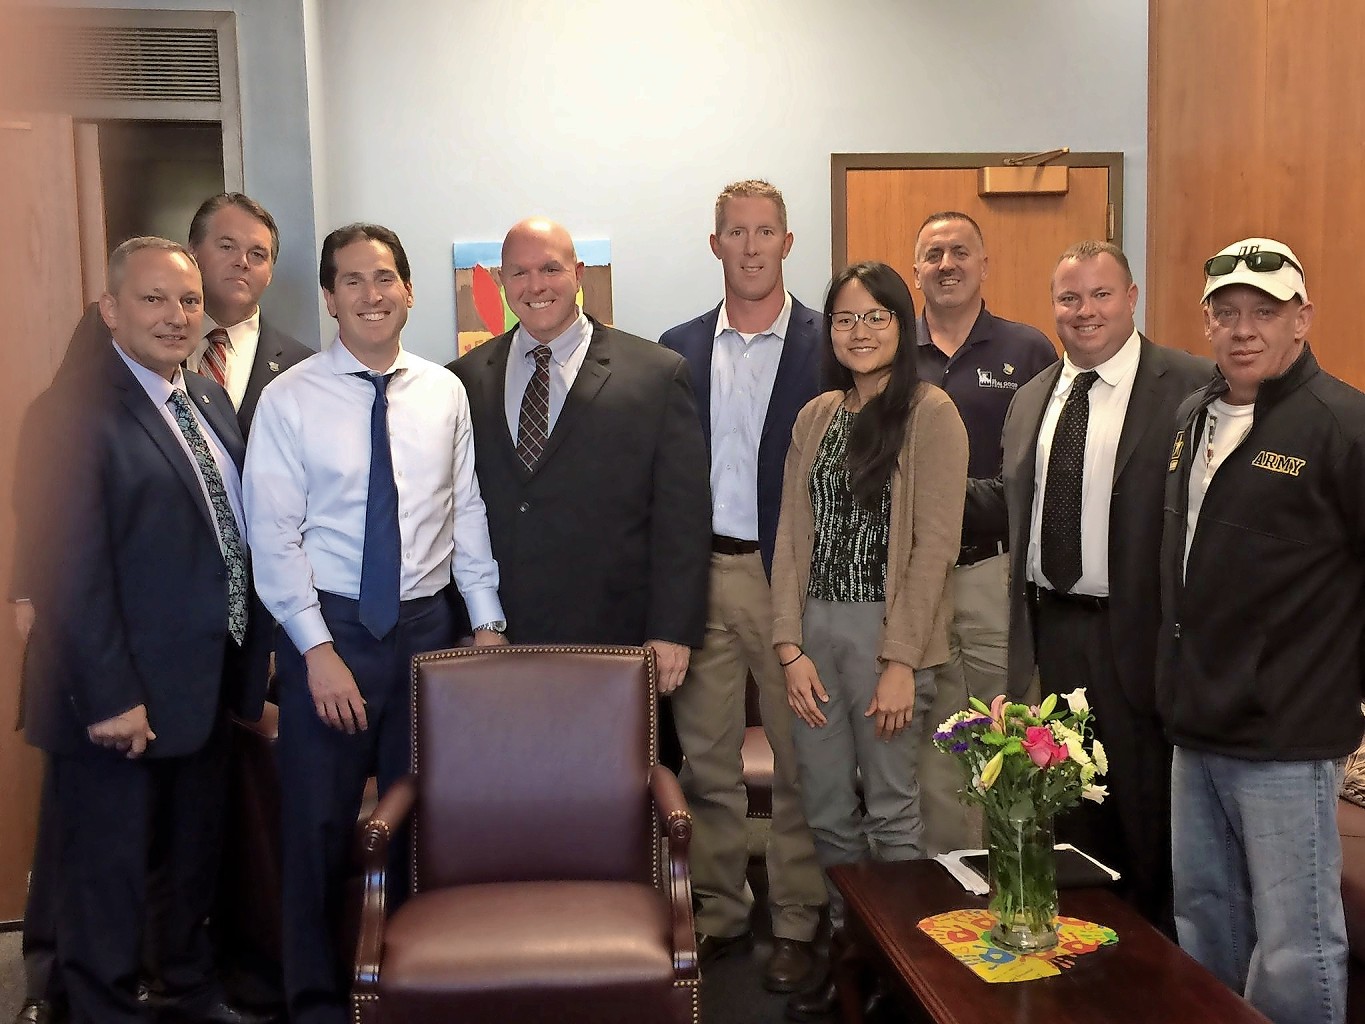 Rockville Centre Detective Chris O’Connor, second from right, with, from left, Pat Saunders, of the Suffolk County PBA; Matt McCauley; State Sen. Todd Kaminsky; Suffolk County police officers Tom Wilson and Scott Bowe; Dr. Stephanie Wu; and Anthony Flammia and John Feal, of the FealGood Foundation.